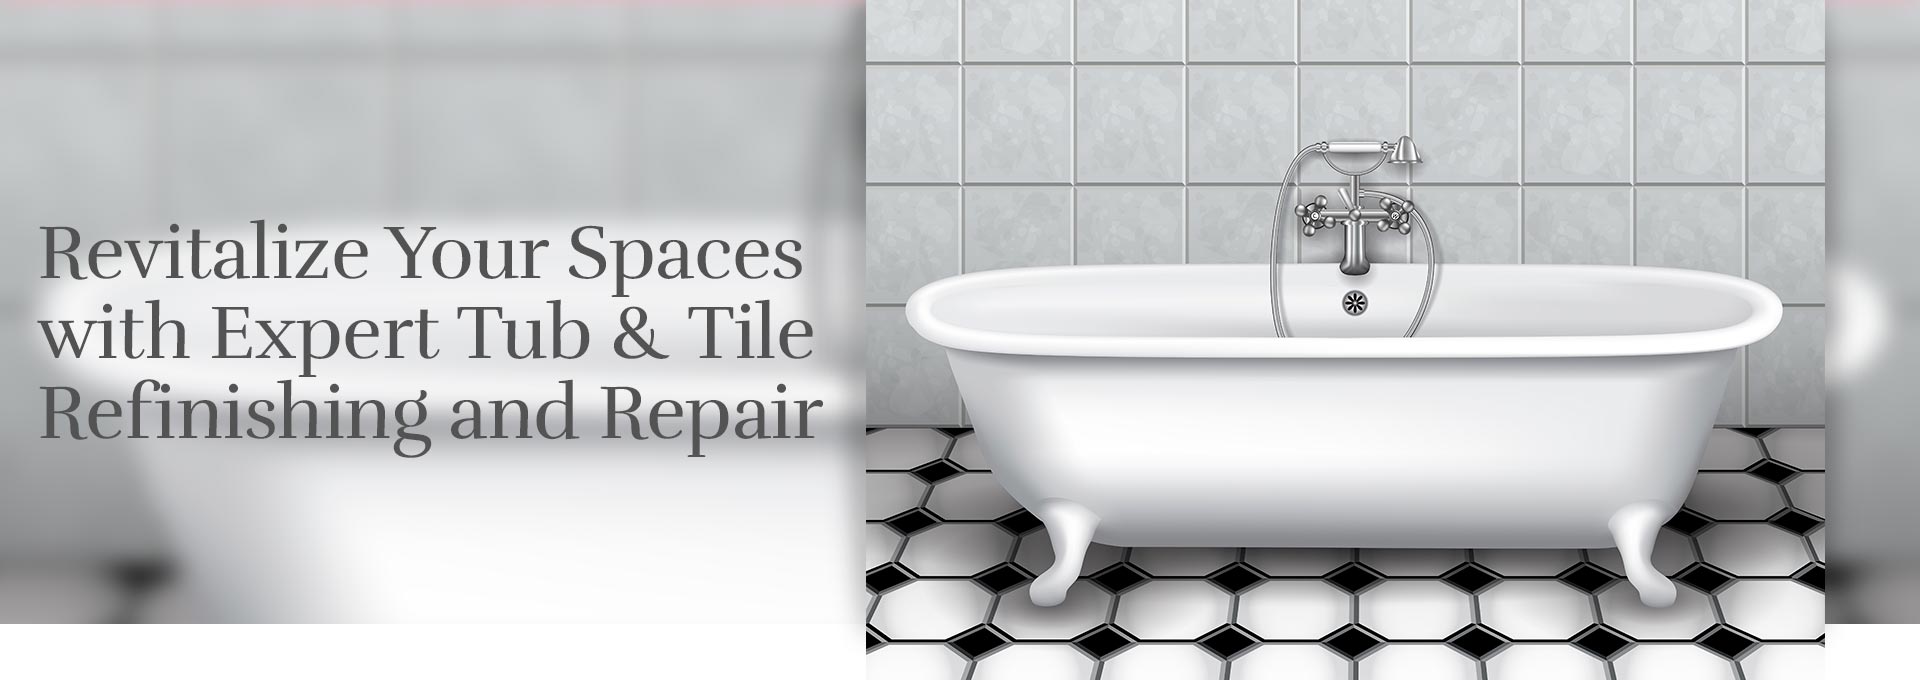 Tub and Tile Reglazing, Refinishing and Repairs